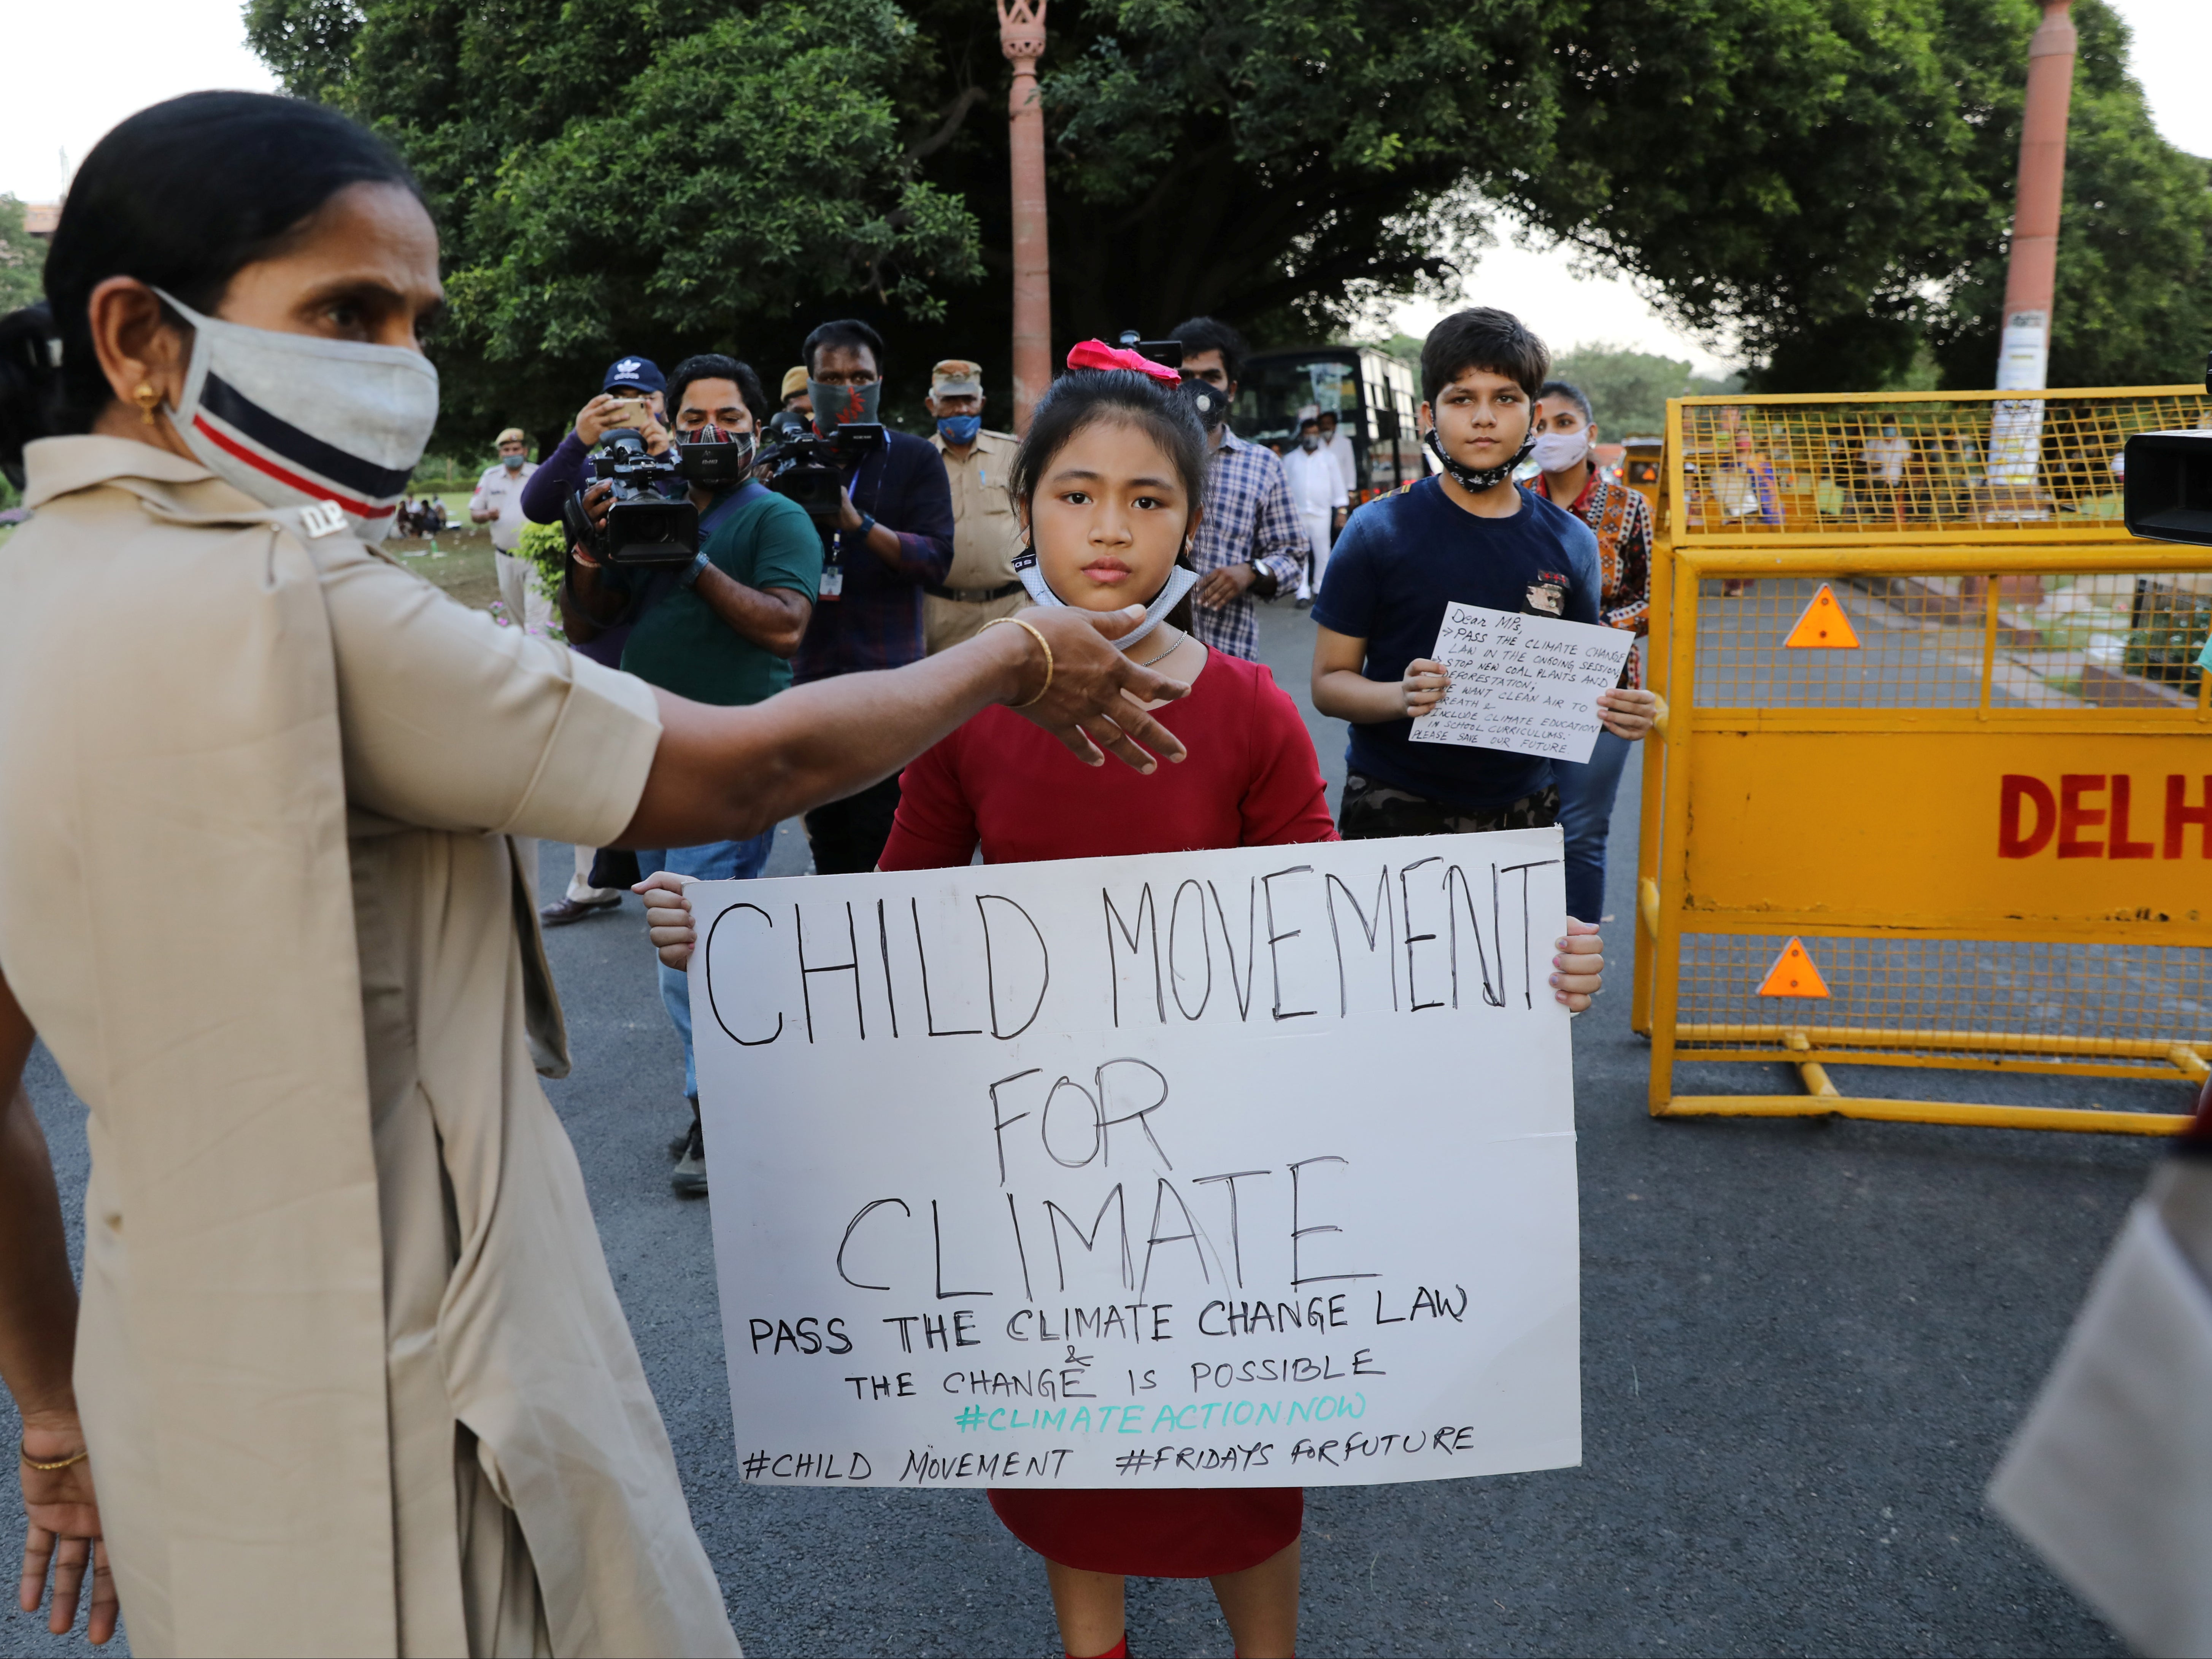 Climate activist Licypriya Kangujam, aged nine, carrying a placard on September 23, 2020. She was detained by police in India at the weekend, according to reports